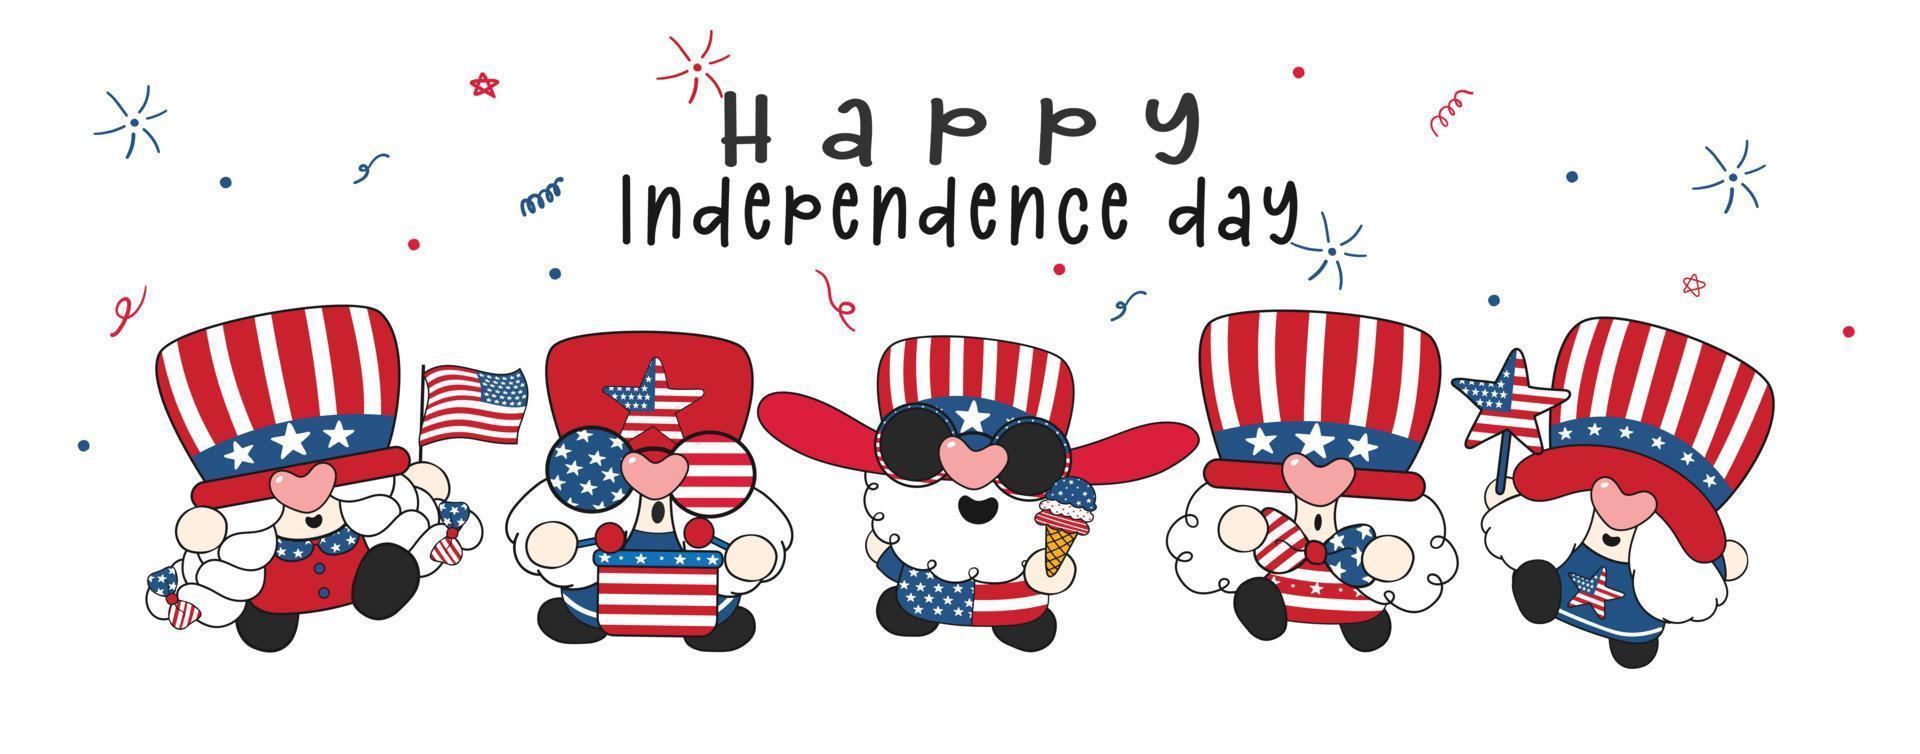 group of five cute happy 4th of july america independence gnomes celebrating cute fun cartoon drawing banner vector